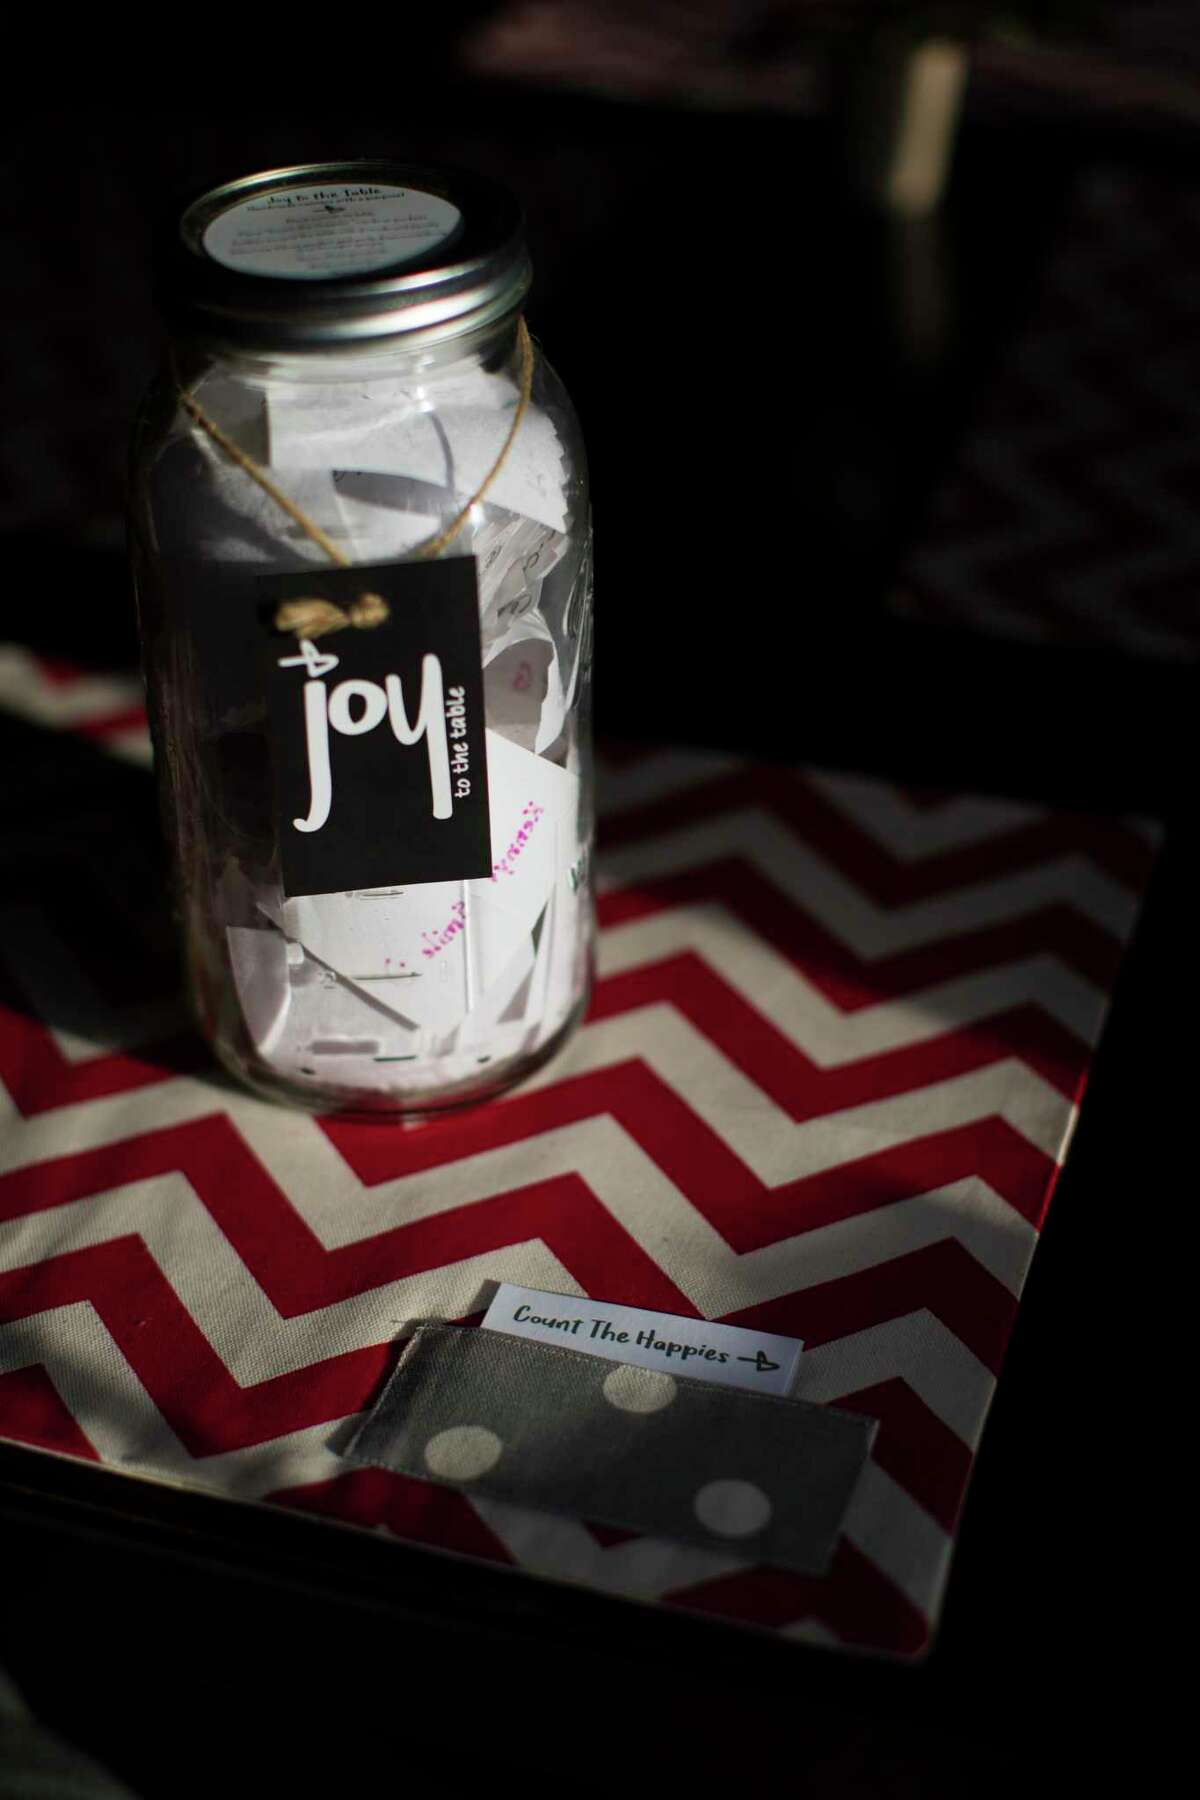 Joy To The Table includes a handmade table runner. or 4 placemates and 50 "Count the Happies" cards to be inserted in the runners pockets. Each "joy" jar sells for $39.99 at www.joytothetable.com